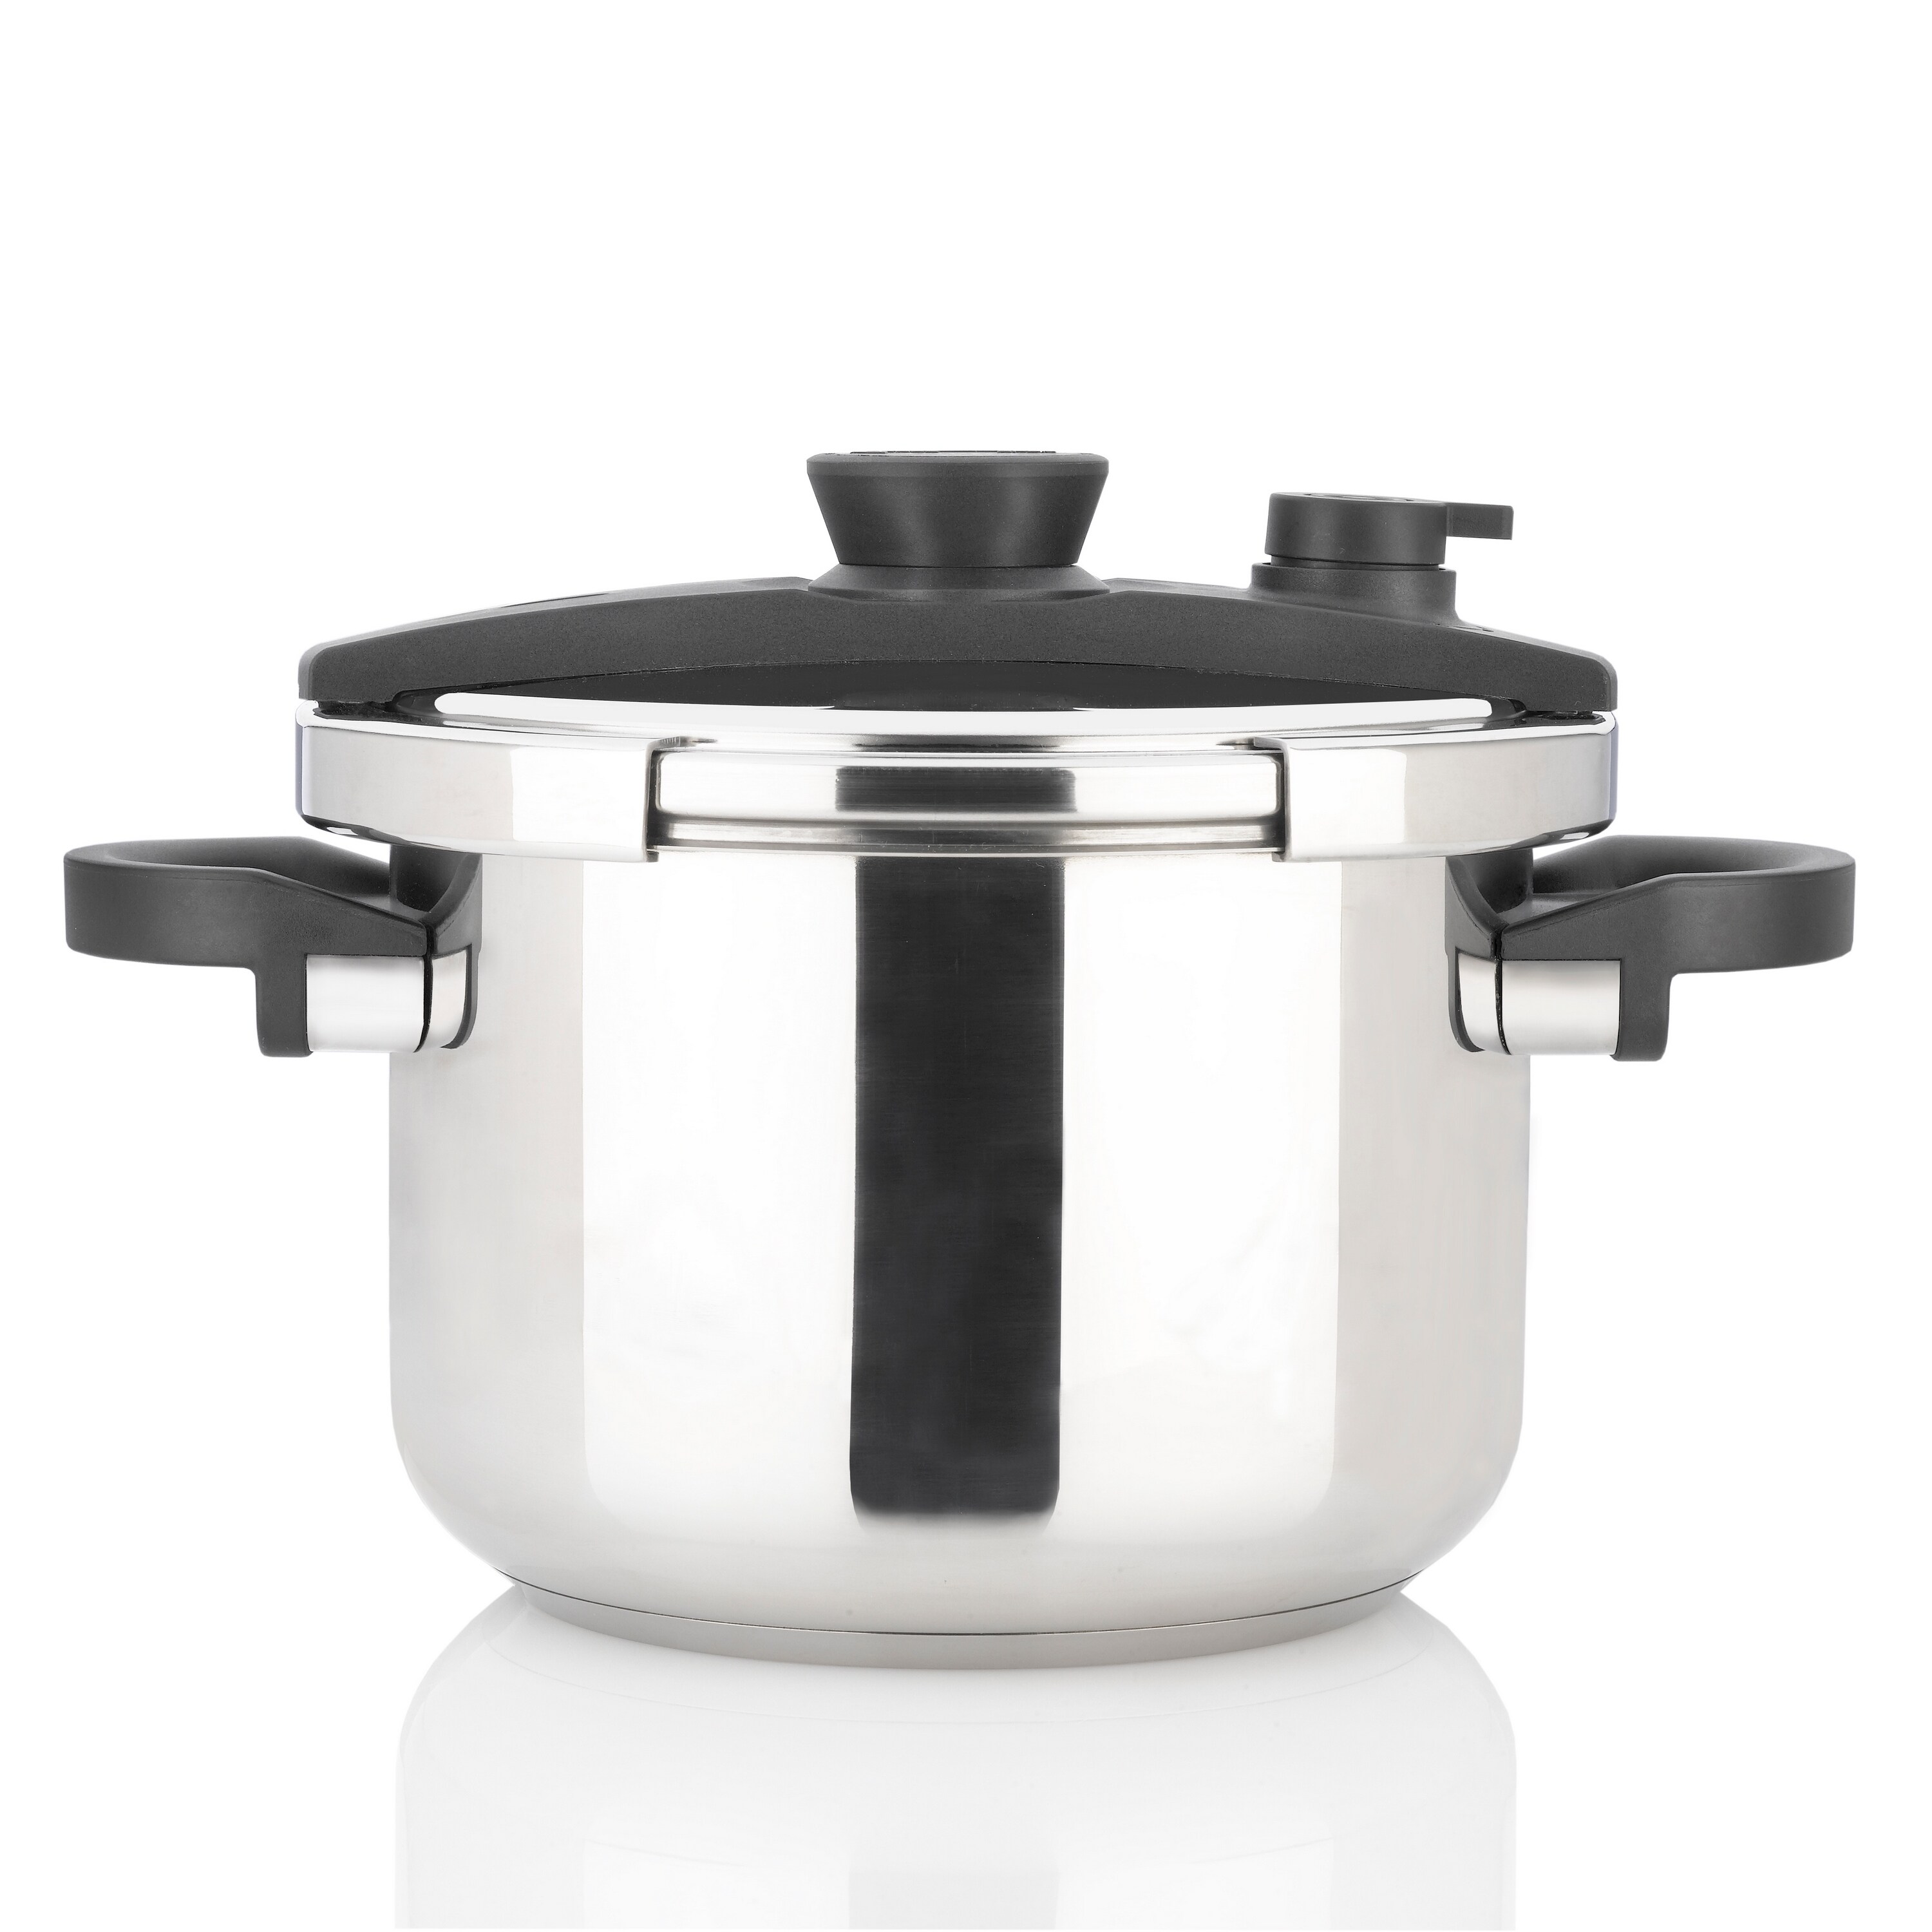 Smart Electric Pressure Cooker & Canner NPC, 9.5 Quart, Stainless